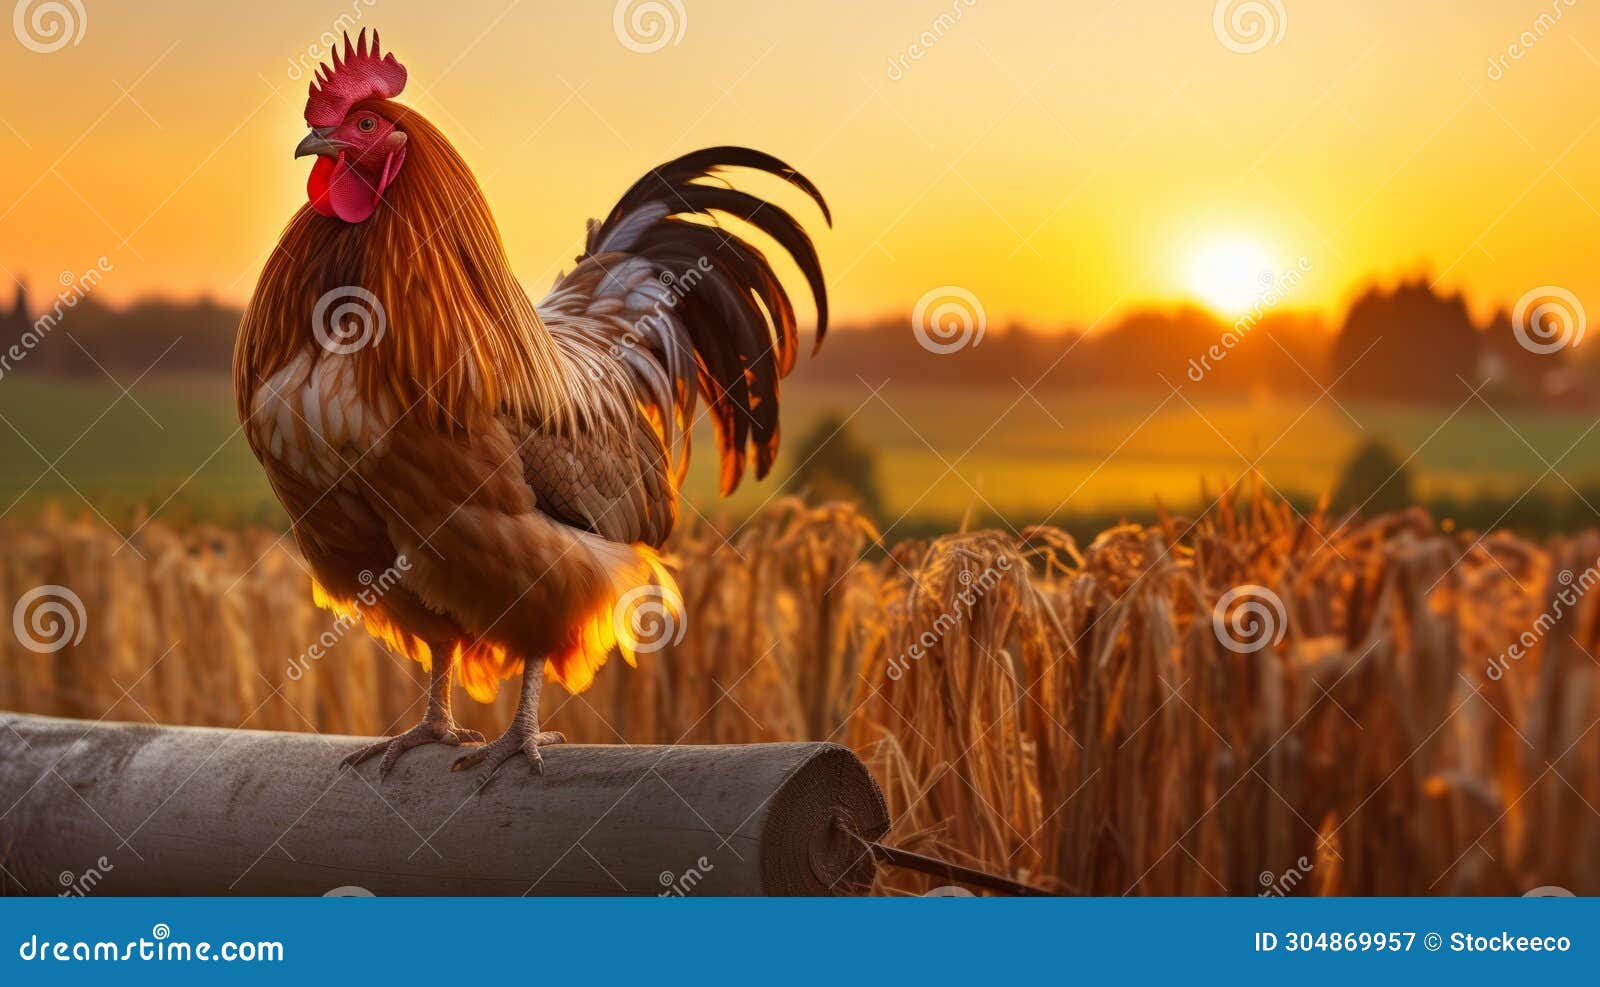 mythological rooster: a pop-culture-infused animal photo at sunset